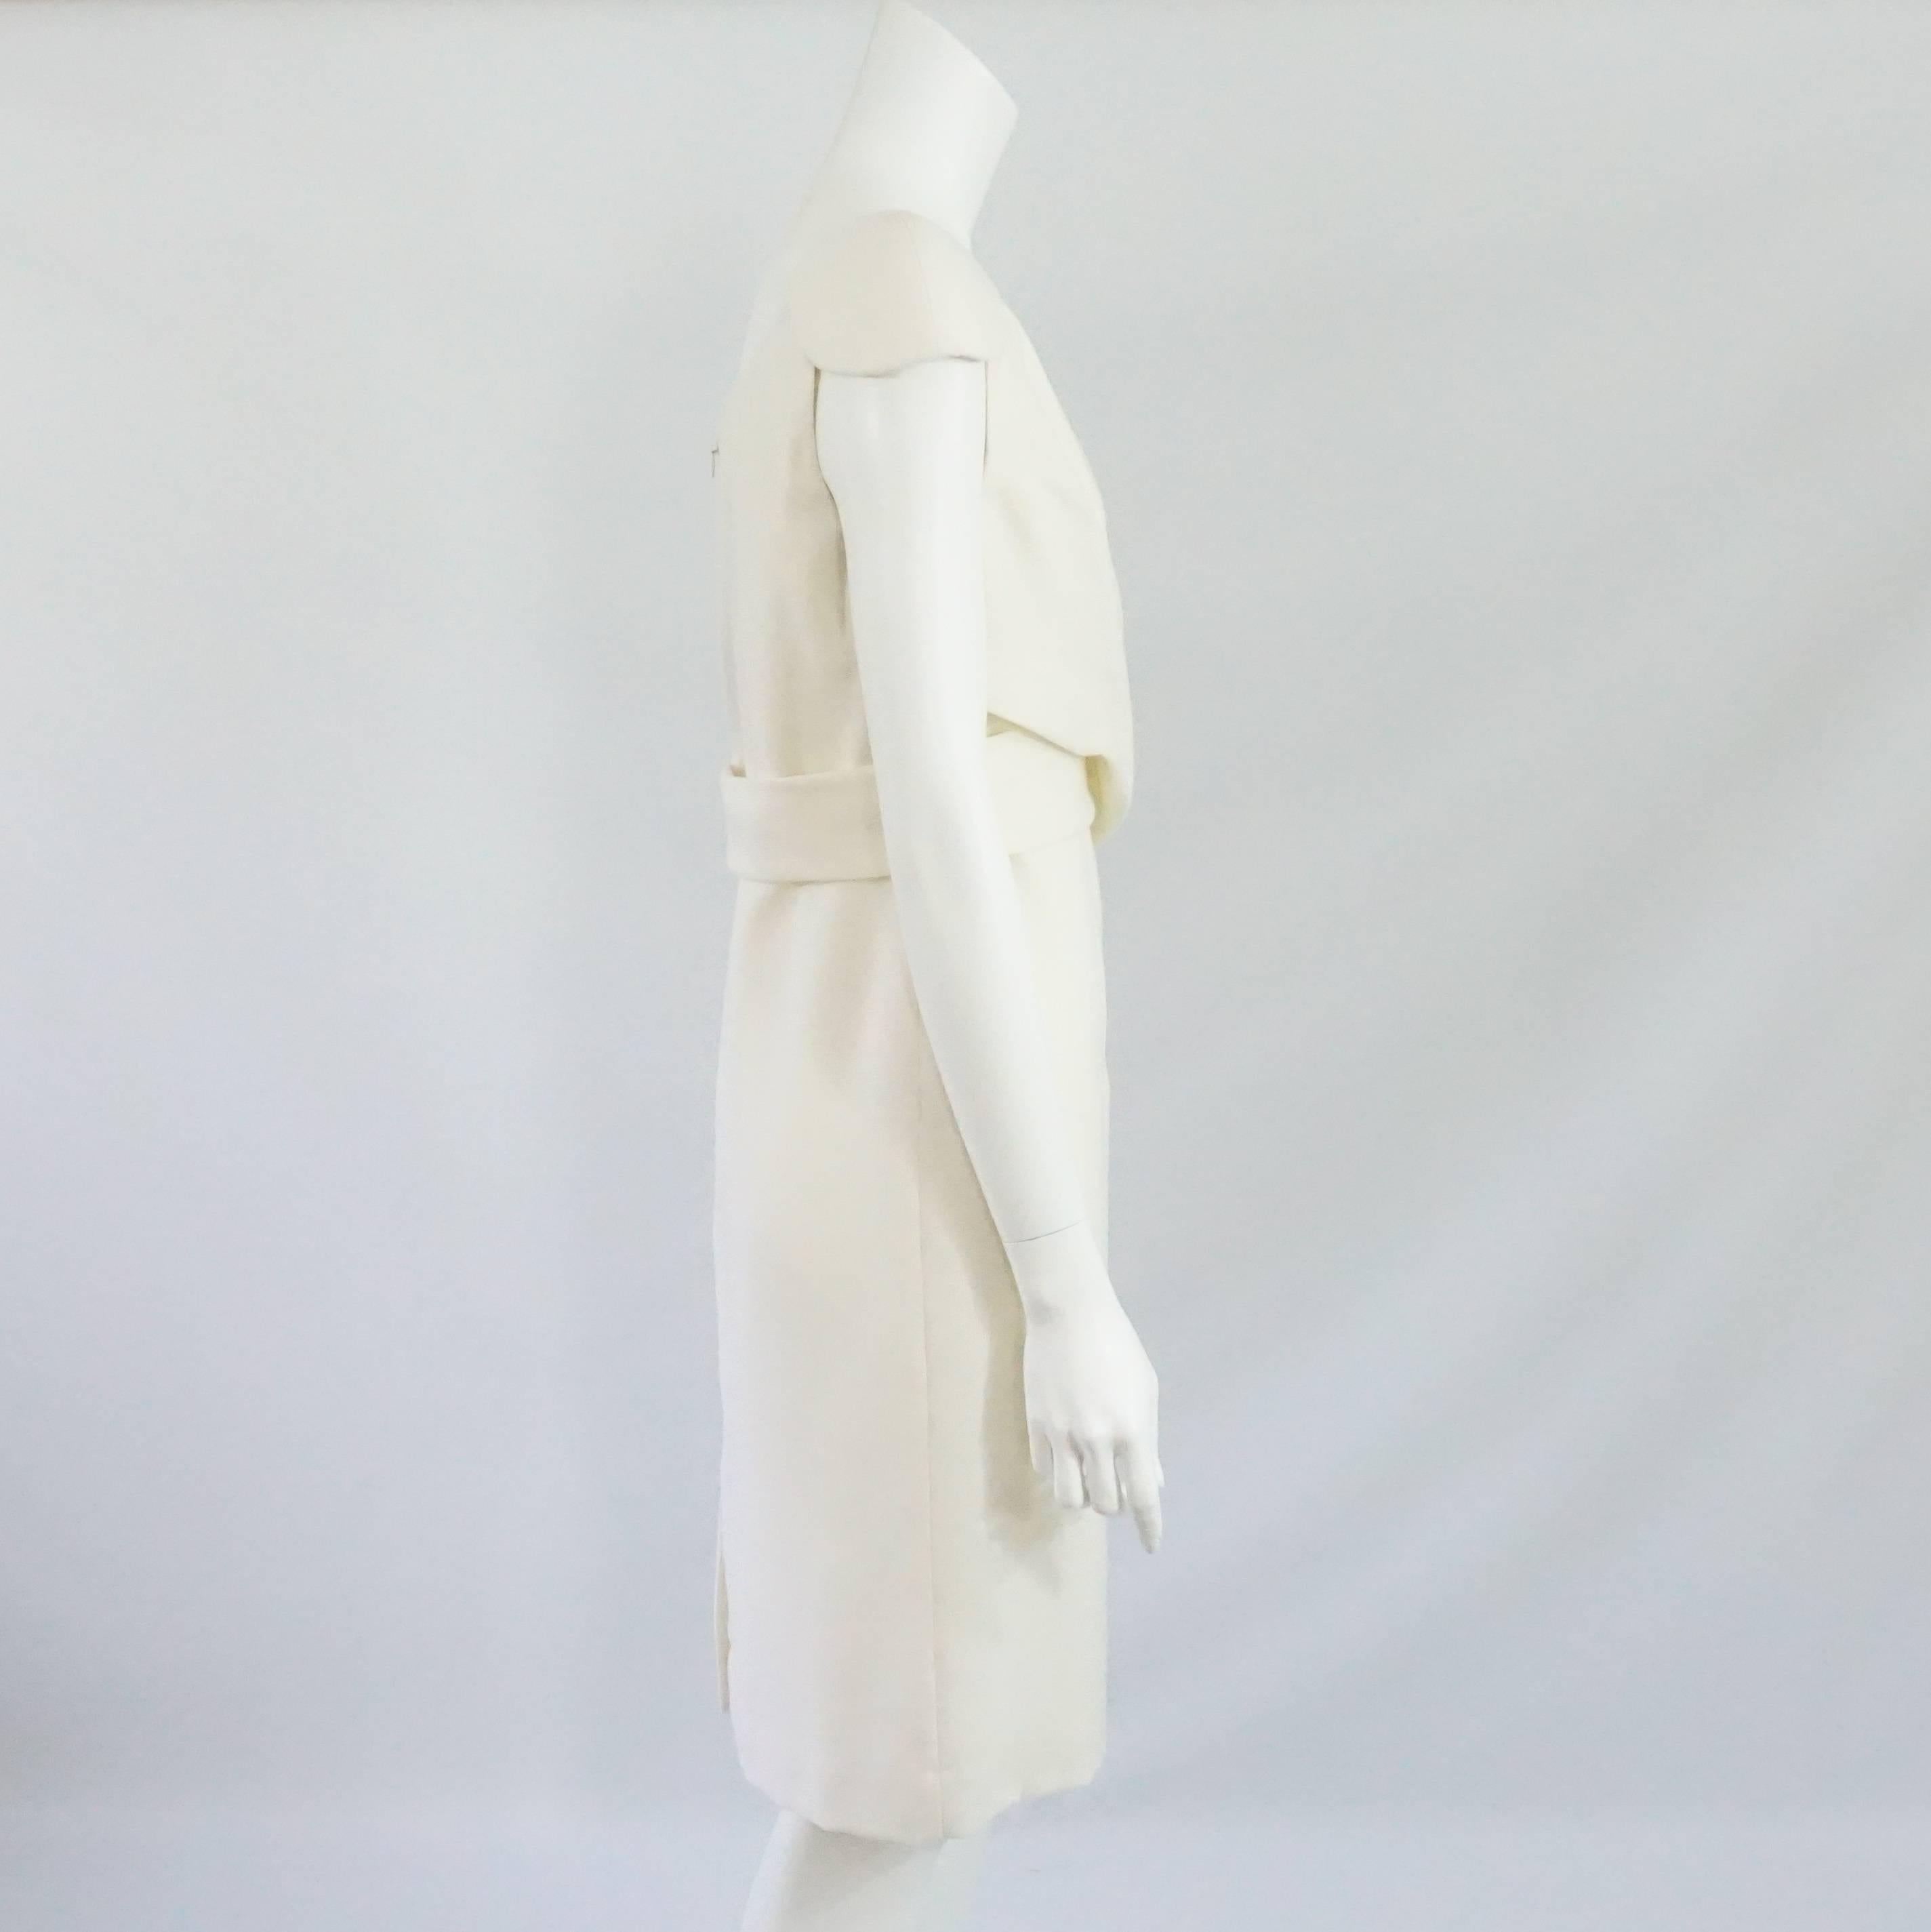 Alexander McQueen Ivory Wool Dress with Crossed Front Design - 46. This dress is a classic must have. It features a padded cap sleeve, V-neck, back zipper, back center slit, and crossing fabric in the bust to waist area. It is in excellent condition